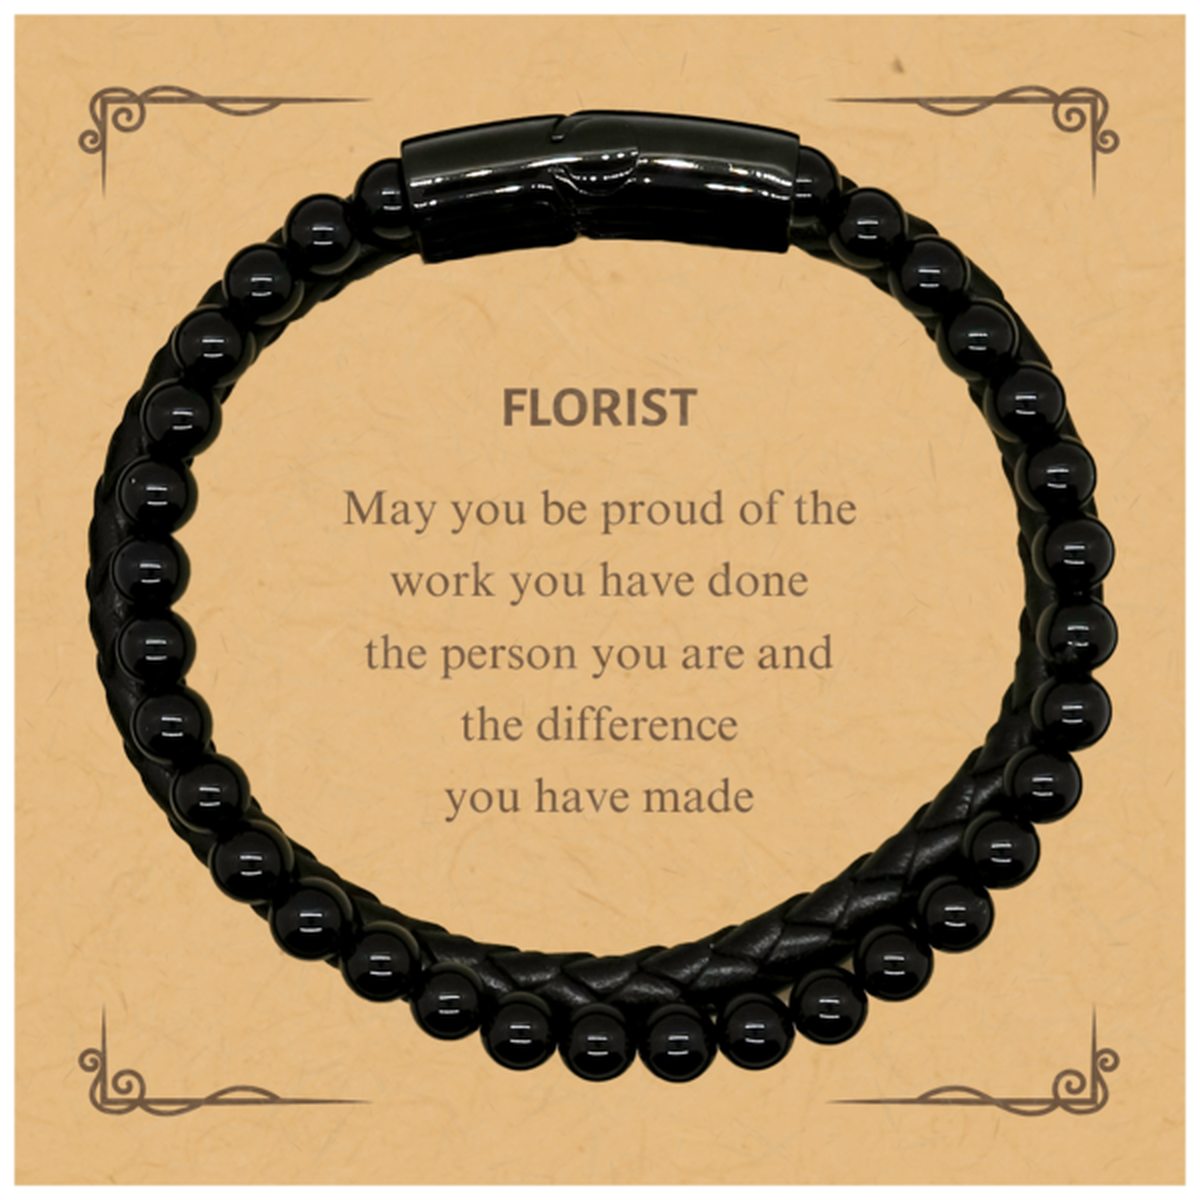 Florist May you be proud of the work you have done, Retirement Florist Stone Leather Bracelets for Colleague Appreciation Gifts Amazing for Florist